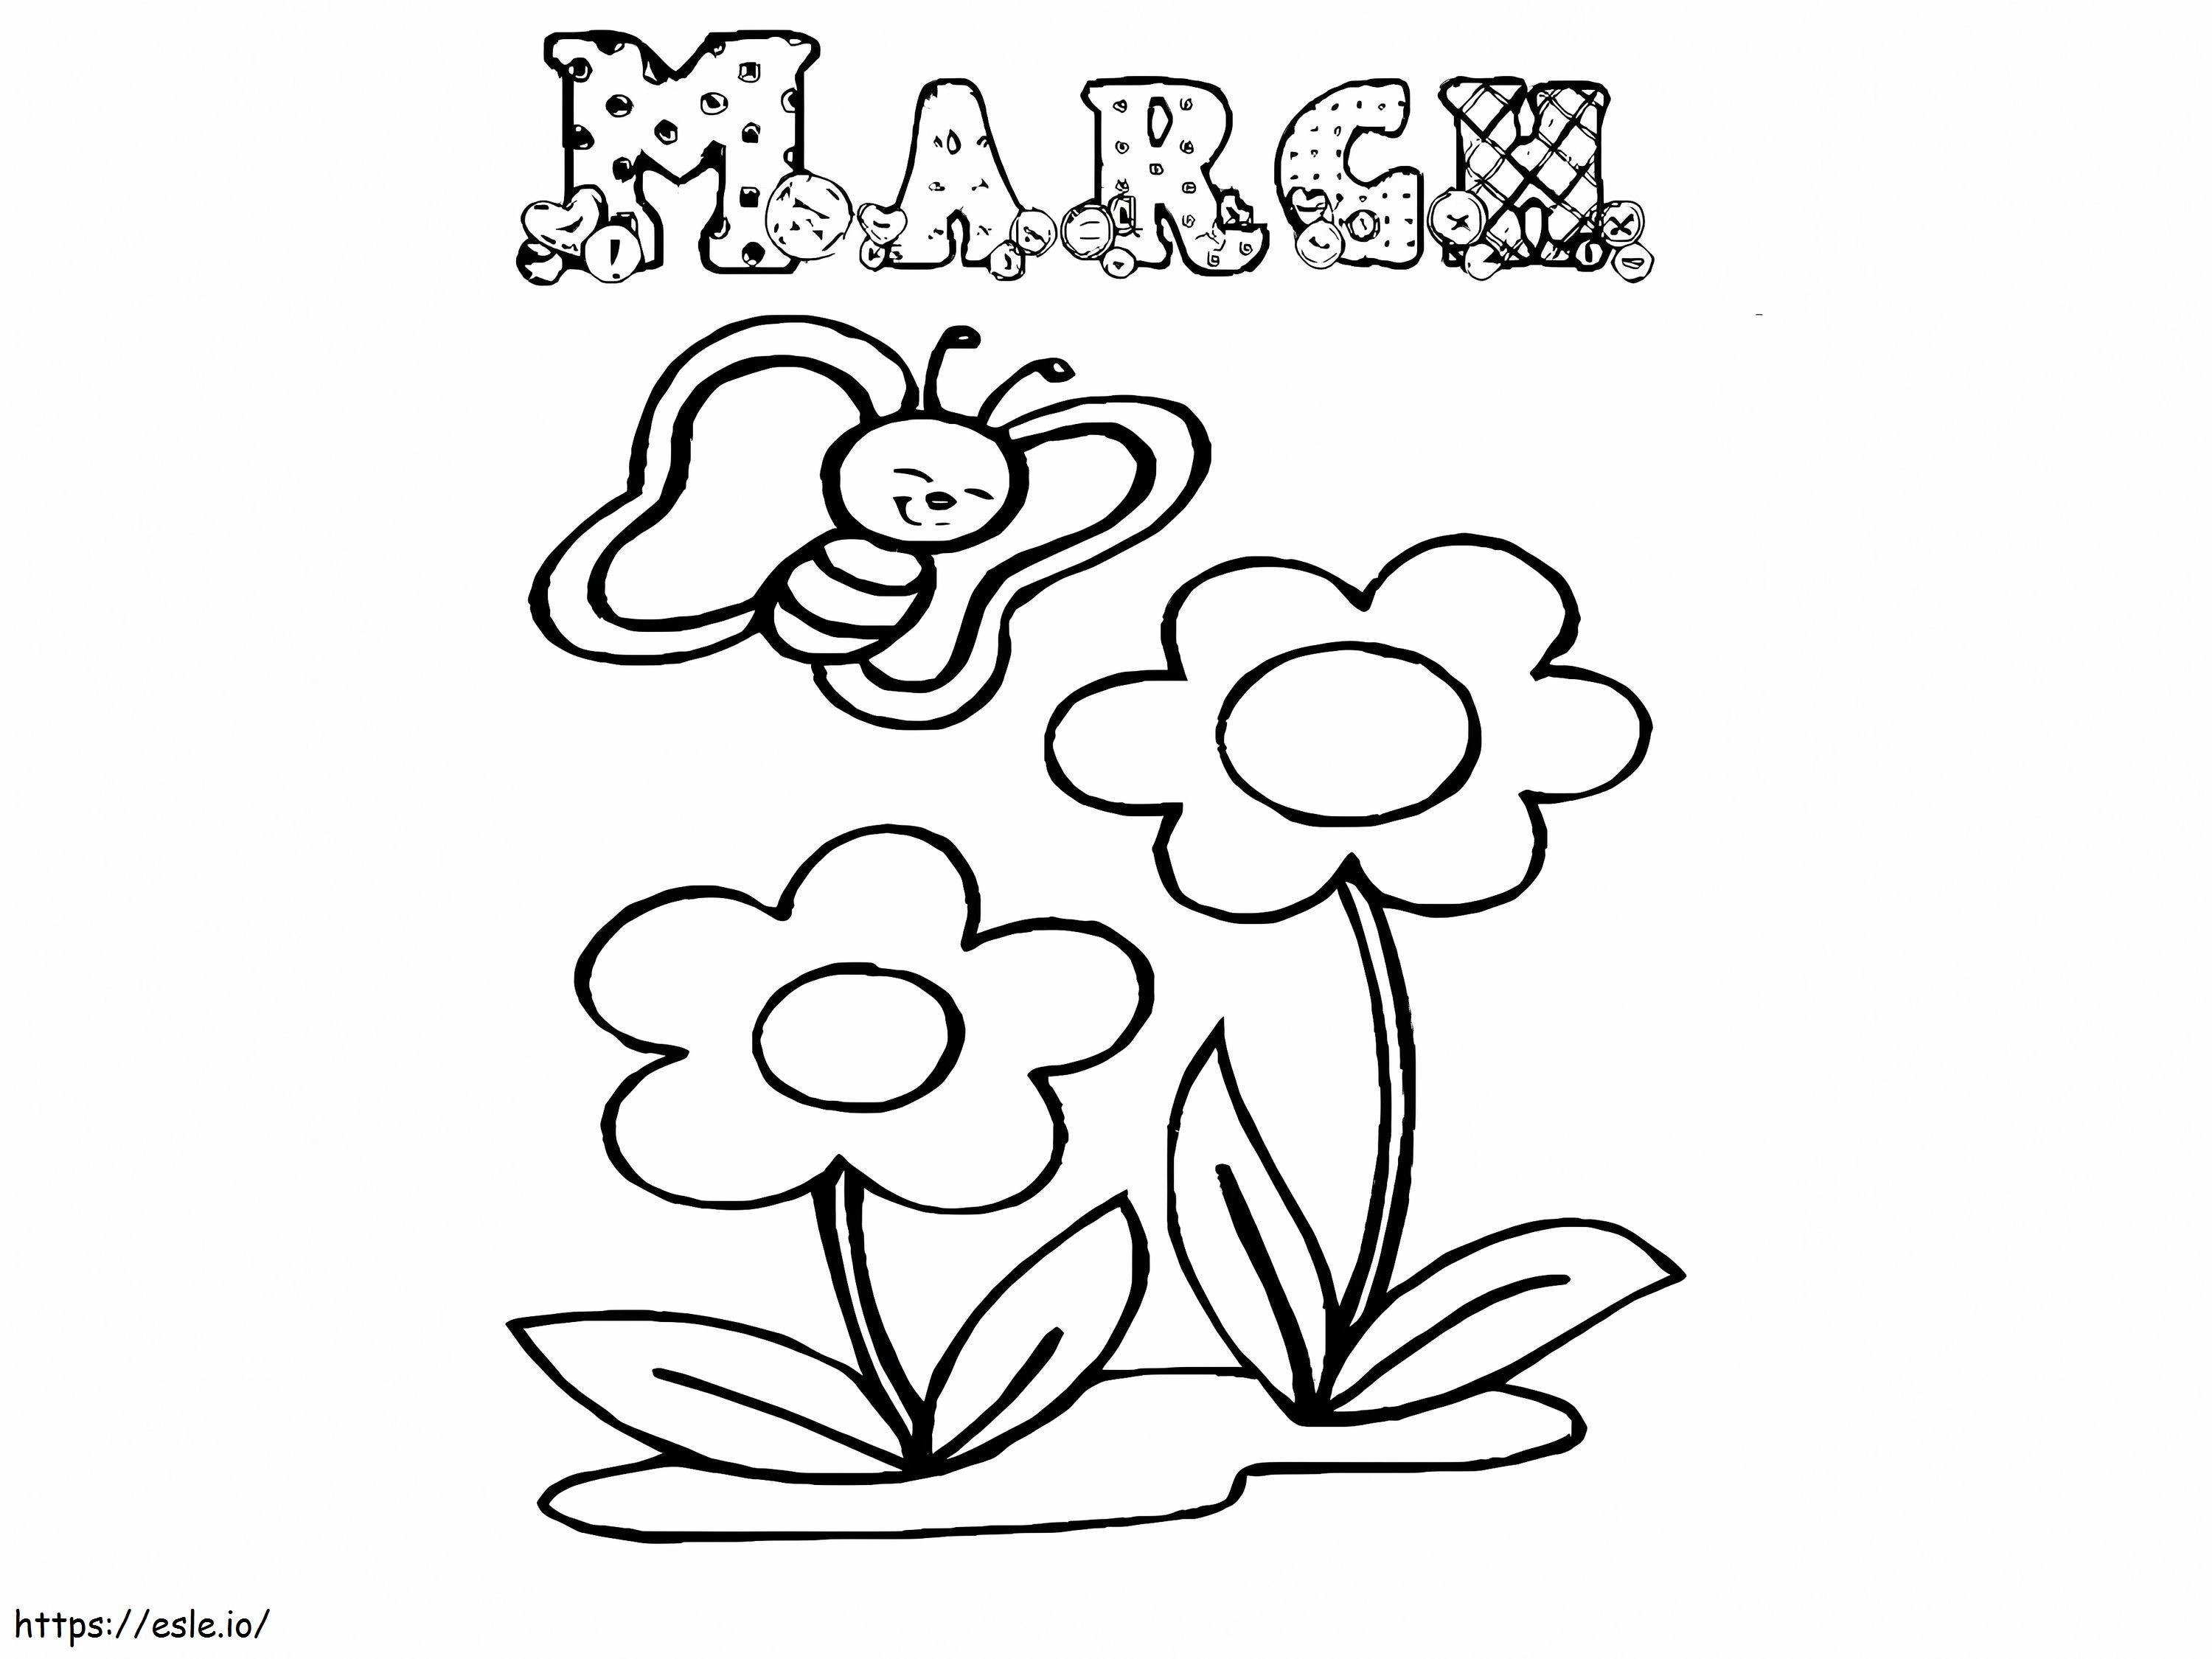 Happy March Coloring Page coloring page